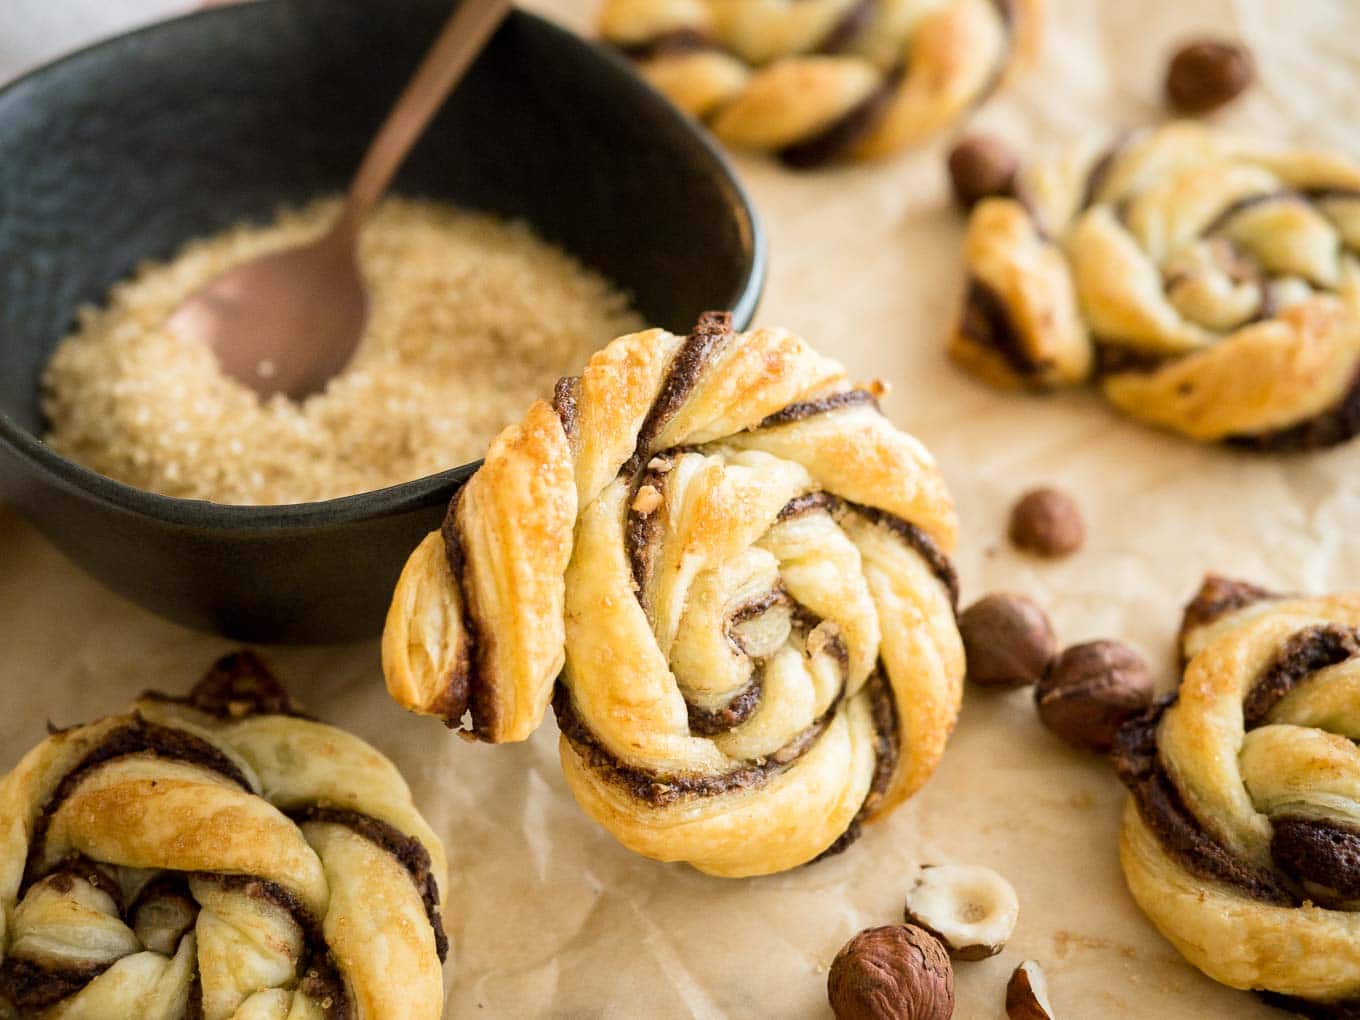 These Twisted Nutella Danish pastries are buttery, flaky, and filled with Nutella! Easy enough to whip up on a weeknight, yet special enough for a party.